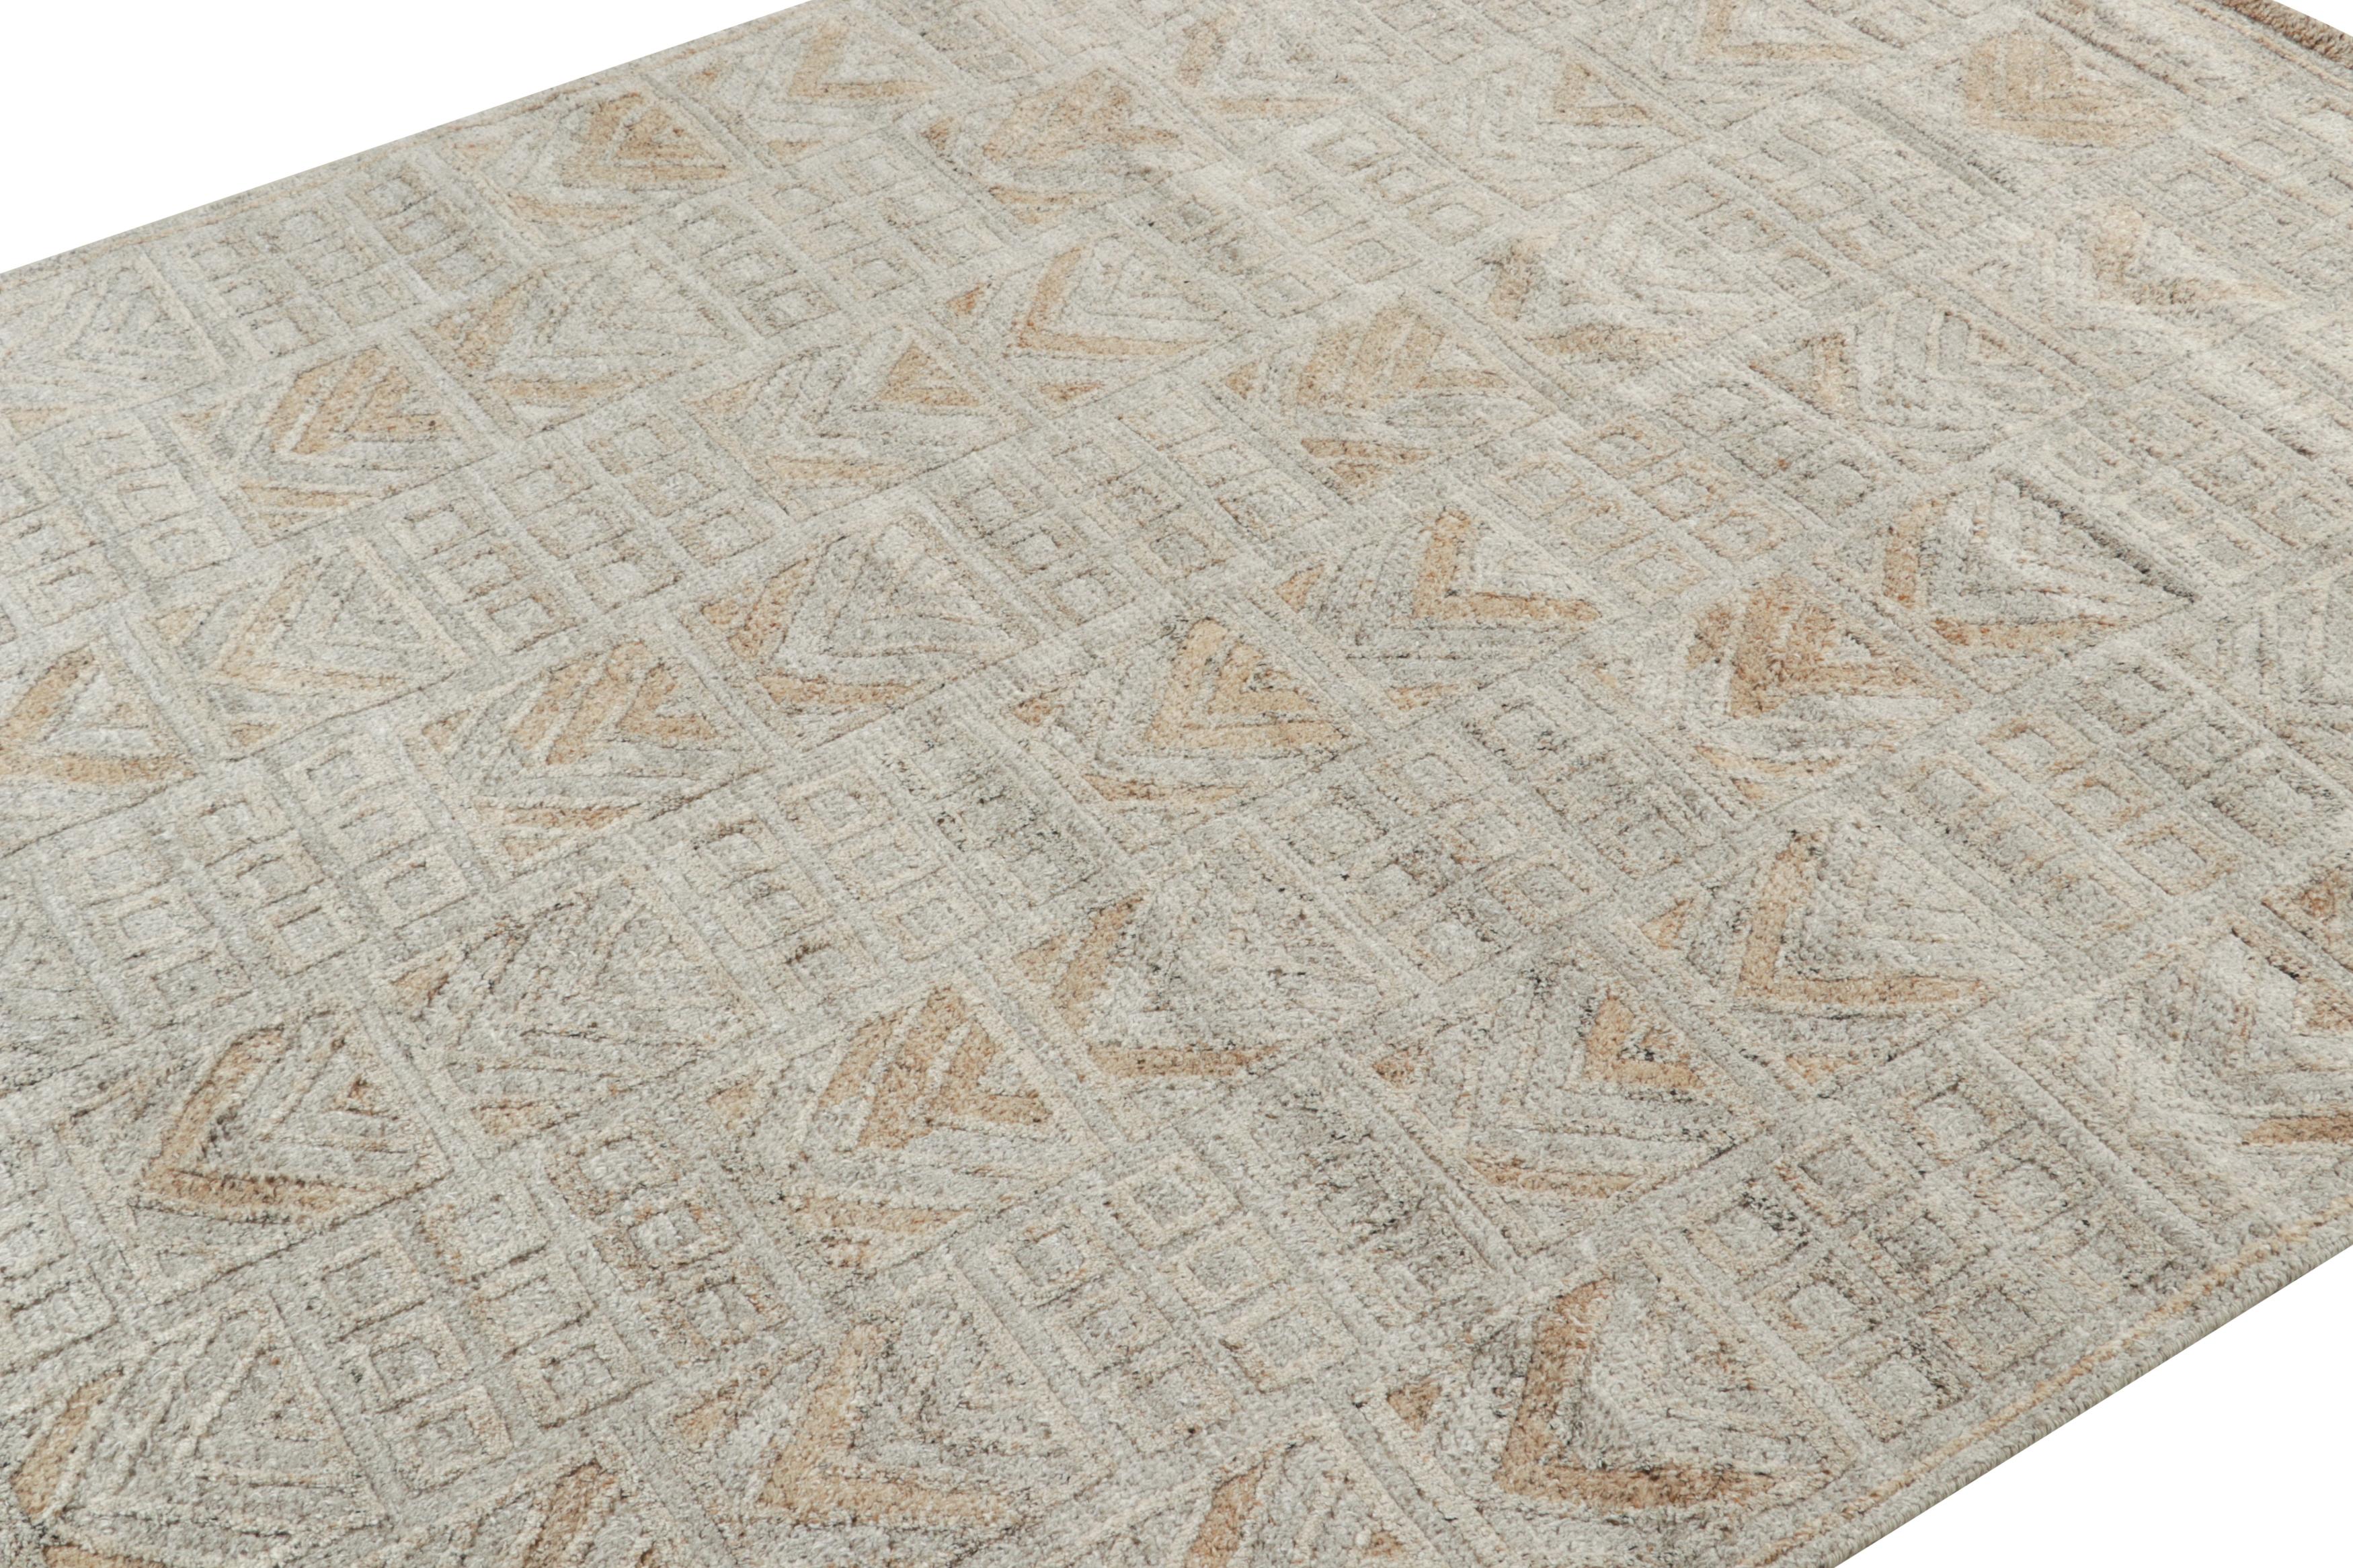 A 9x12 Swedish outdoor style pile rug from our award-winning Scandinavian collection. Handwoven in performance polyester. 

On the Design: 

This rug enjoys a smart sense of movement with crisp geometric patterns in beige and brown on a soothing